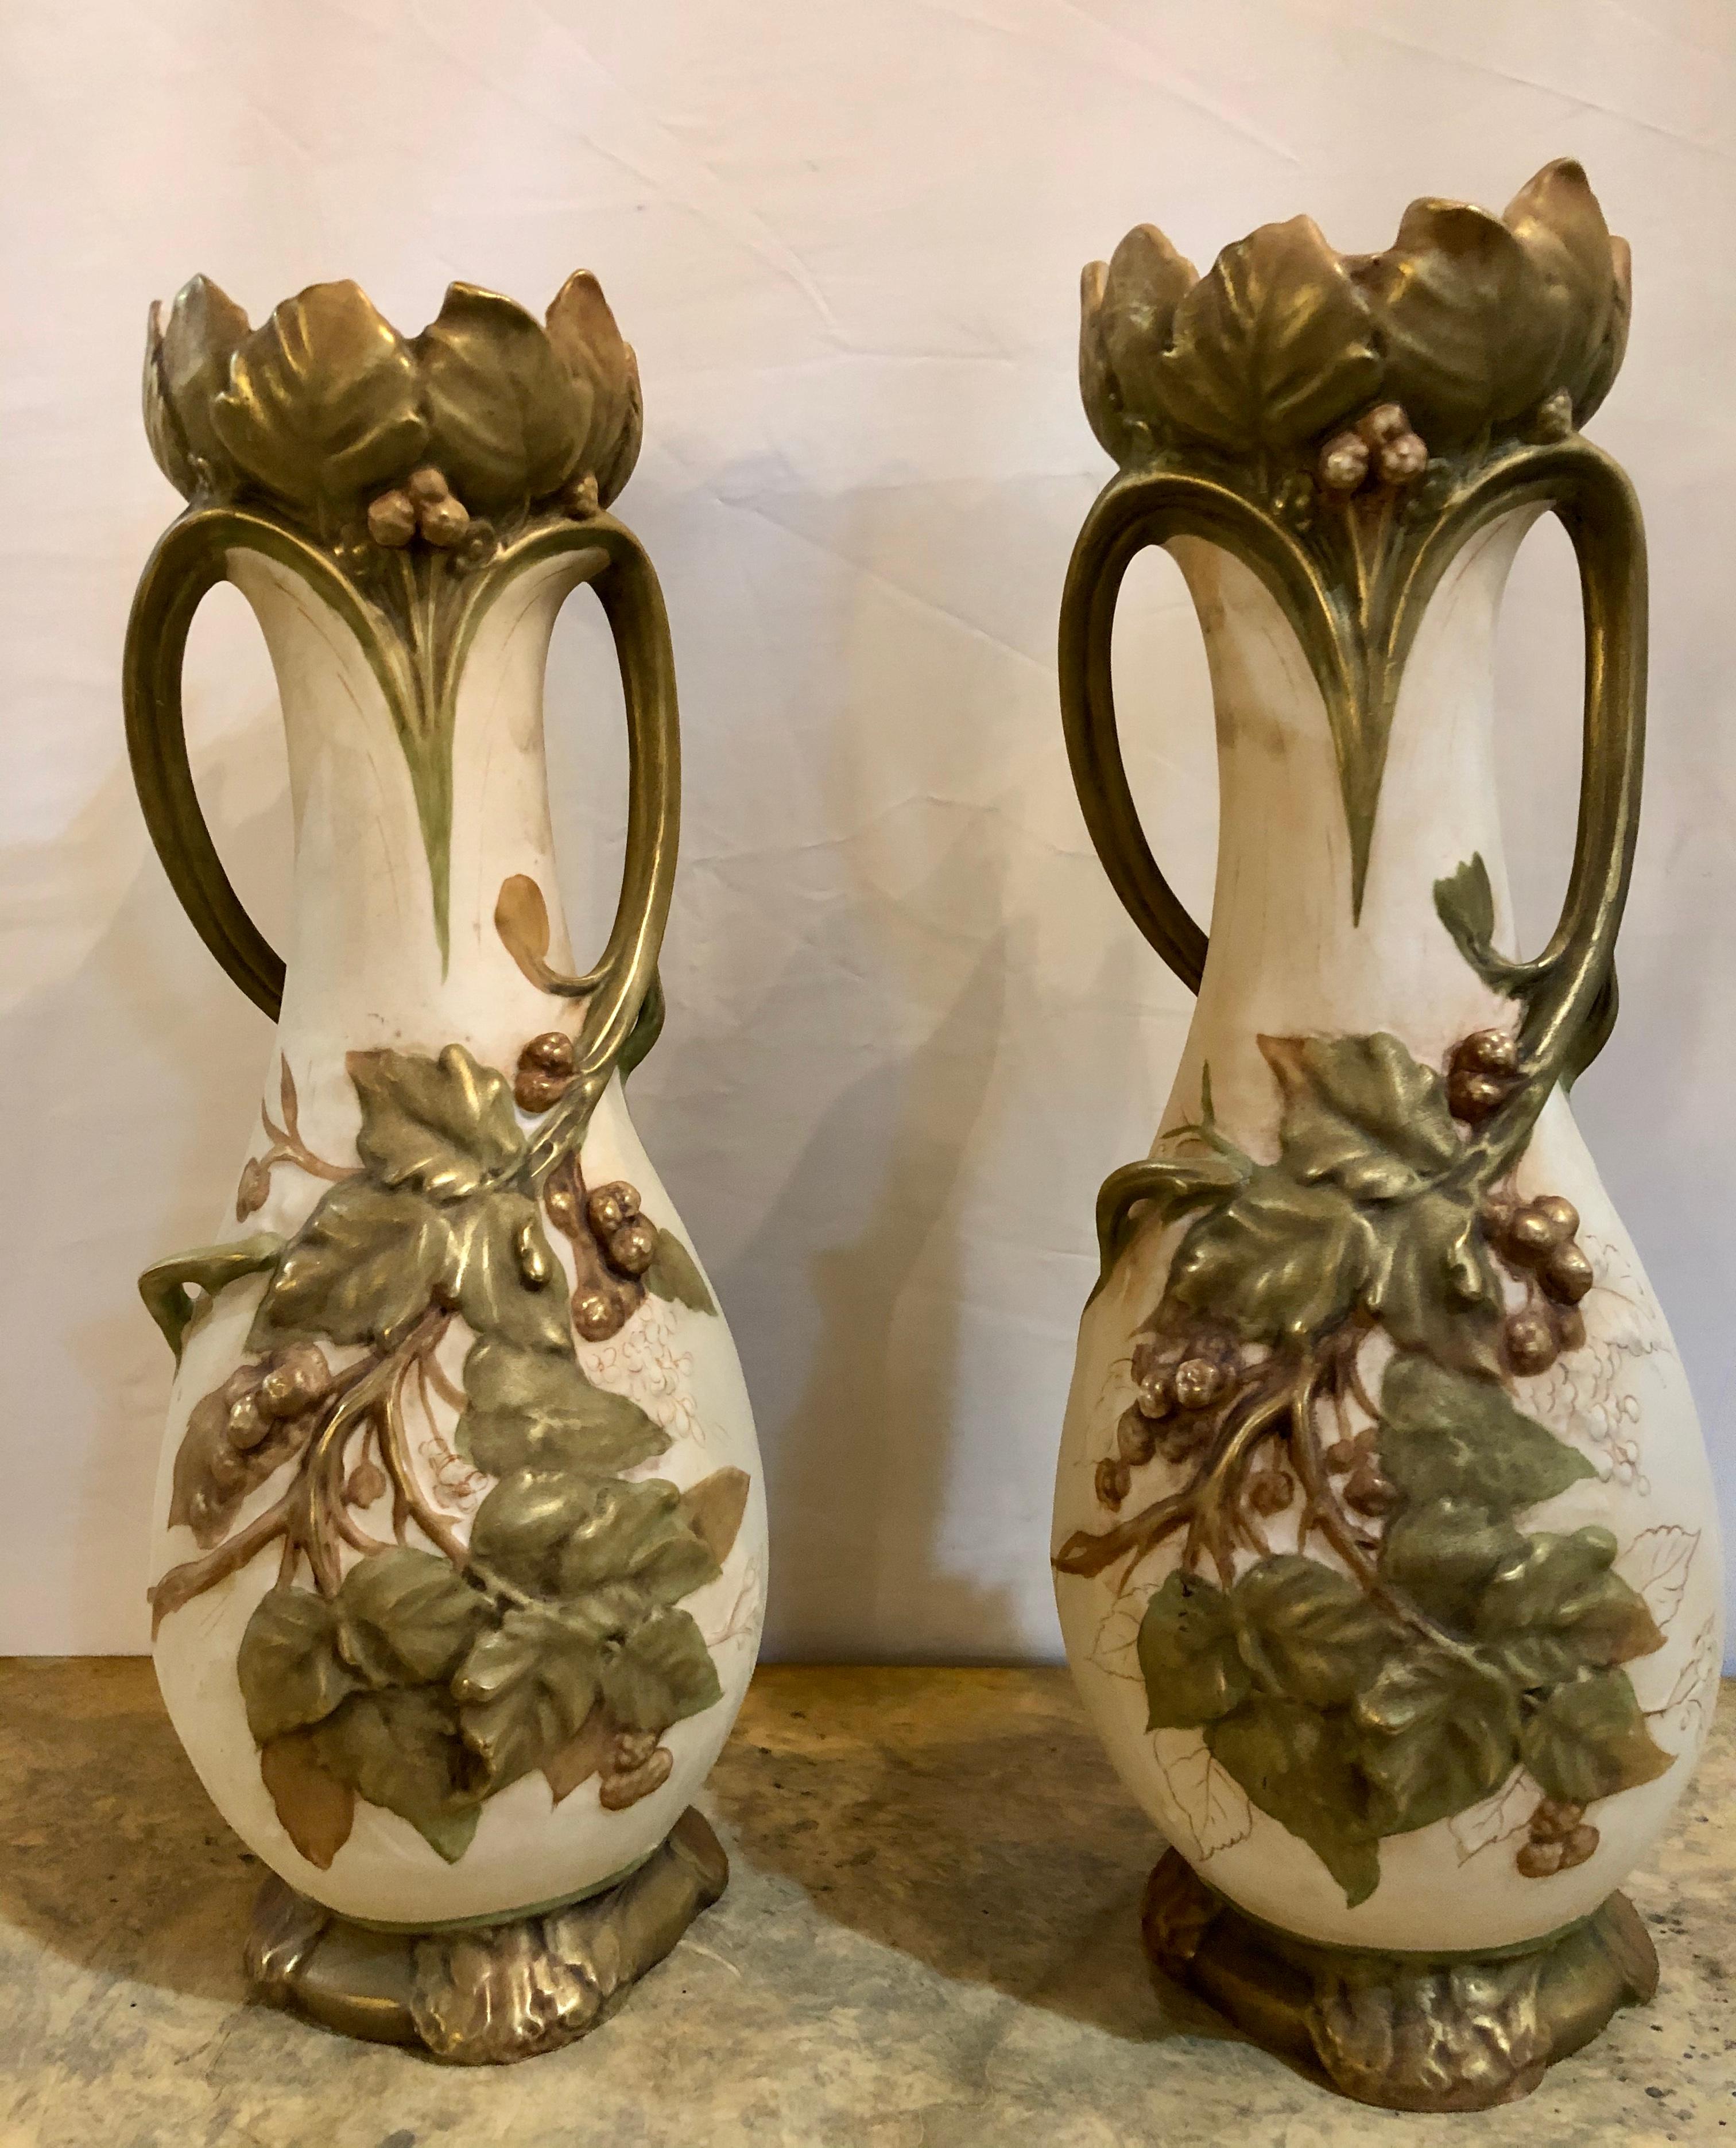 Pair of Nouveau Royal Dux flower vases or centerpieces. Each bearing the Royal Dux Seal and inventory number on the reverse. A Fine pair of porcelain vases each depicting raised grapes on the vine.


ISX.